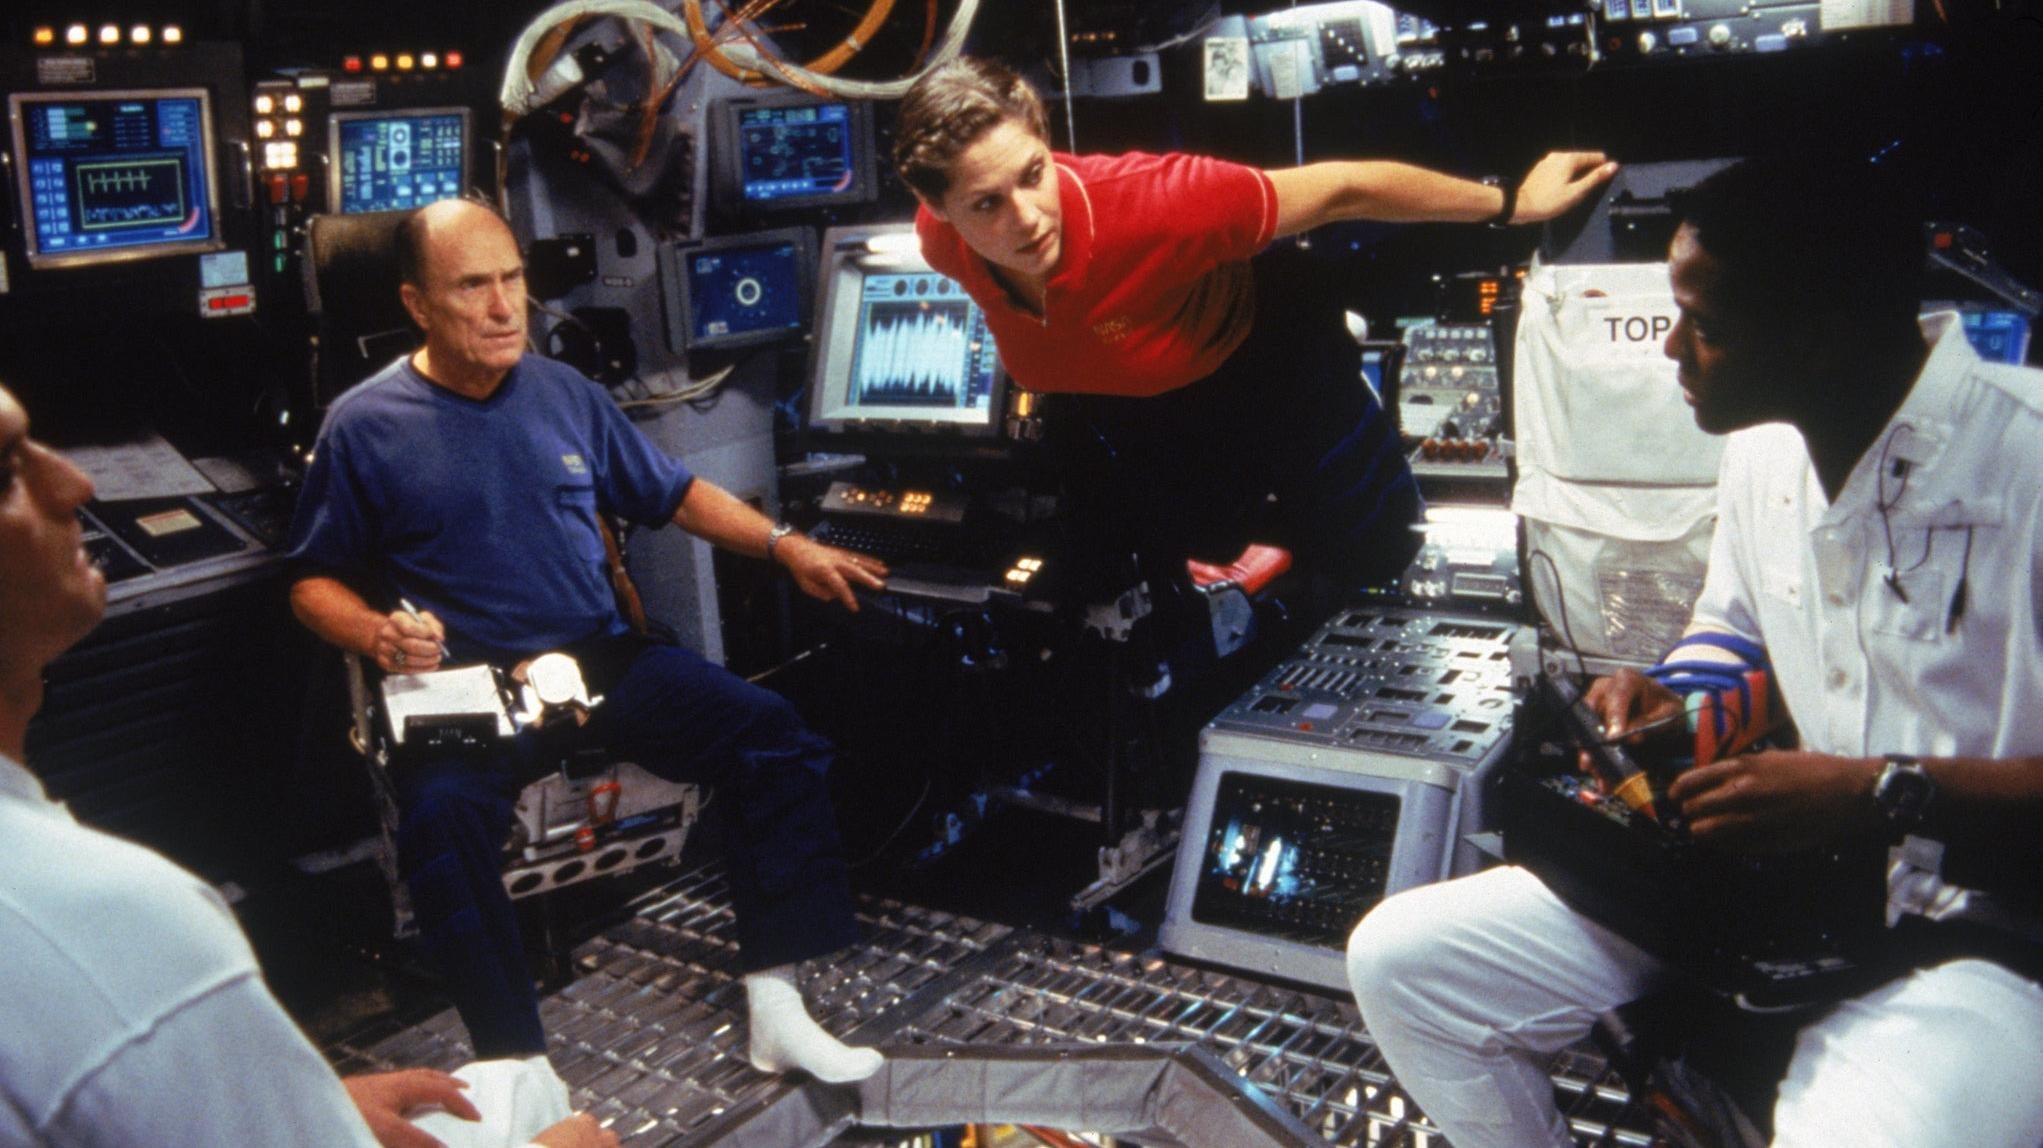 Robert Duvall, Mary McCormack and Blair Underwood as some of the astronauts.  (Image: Paramount)